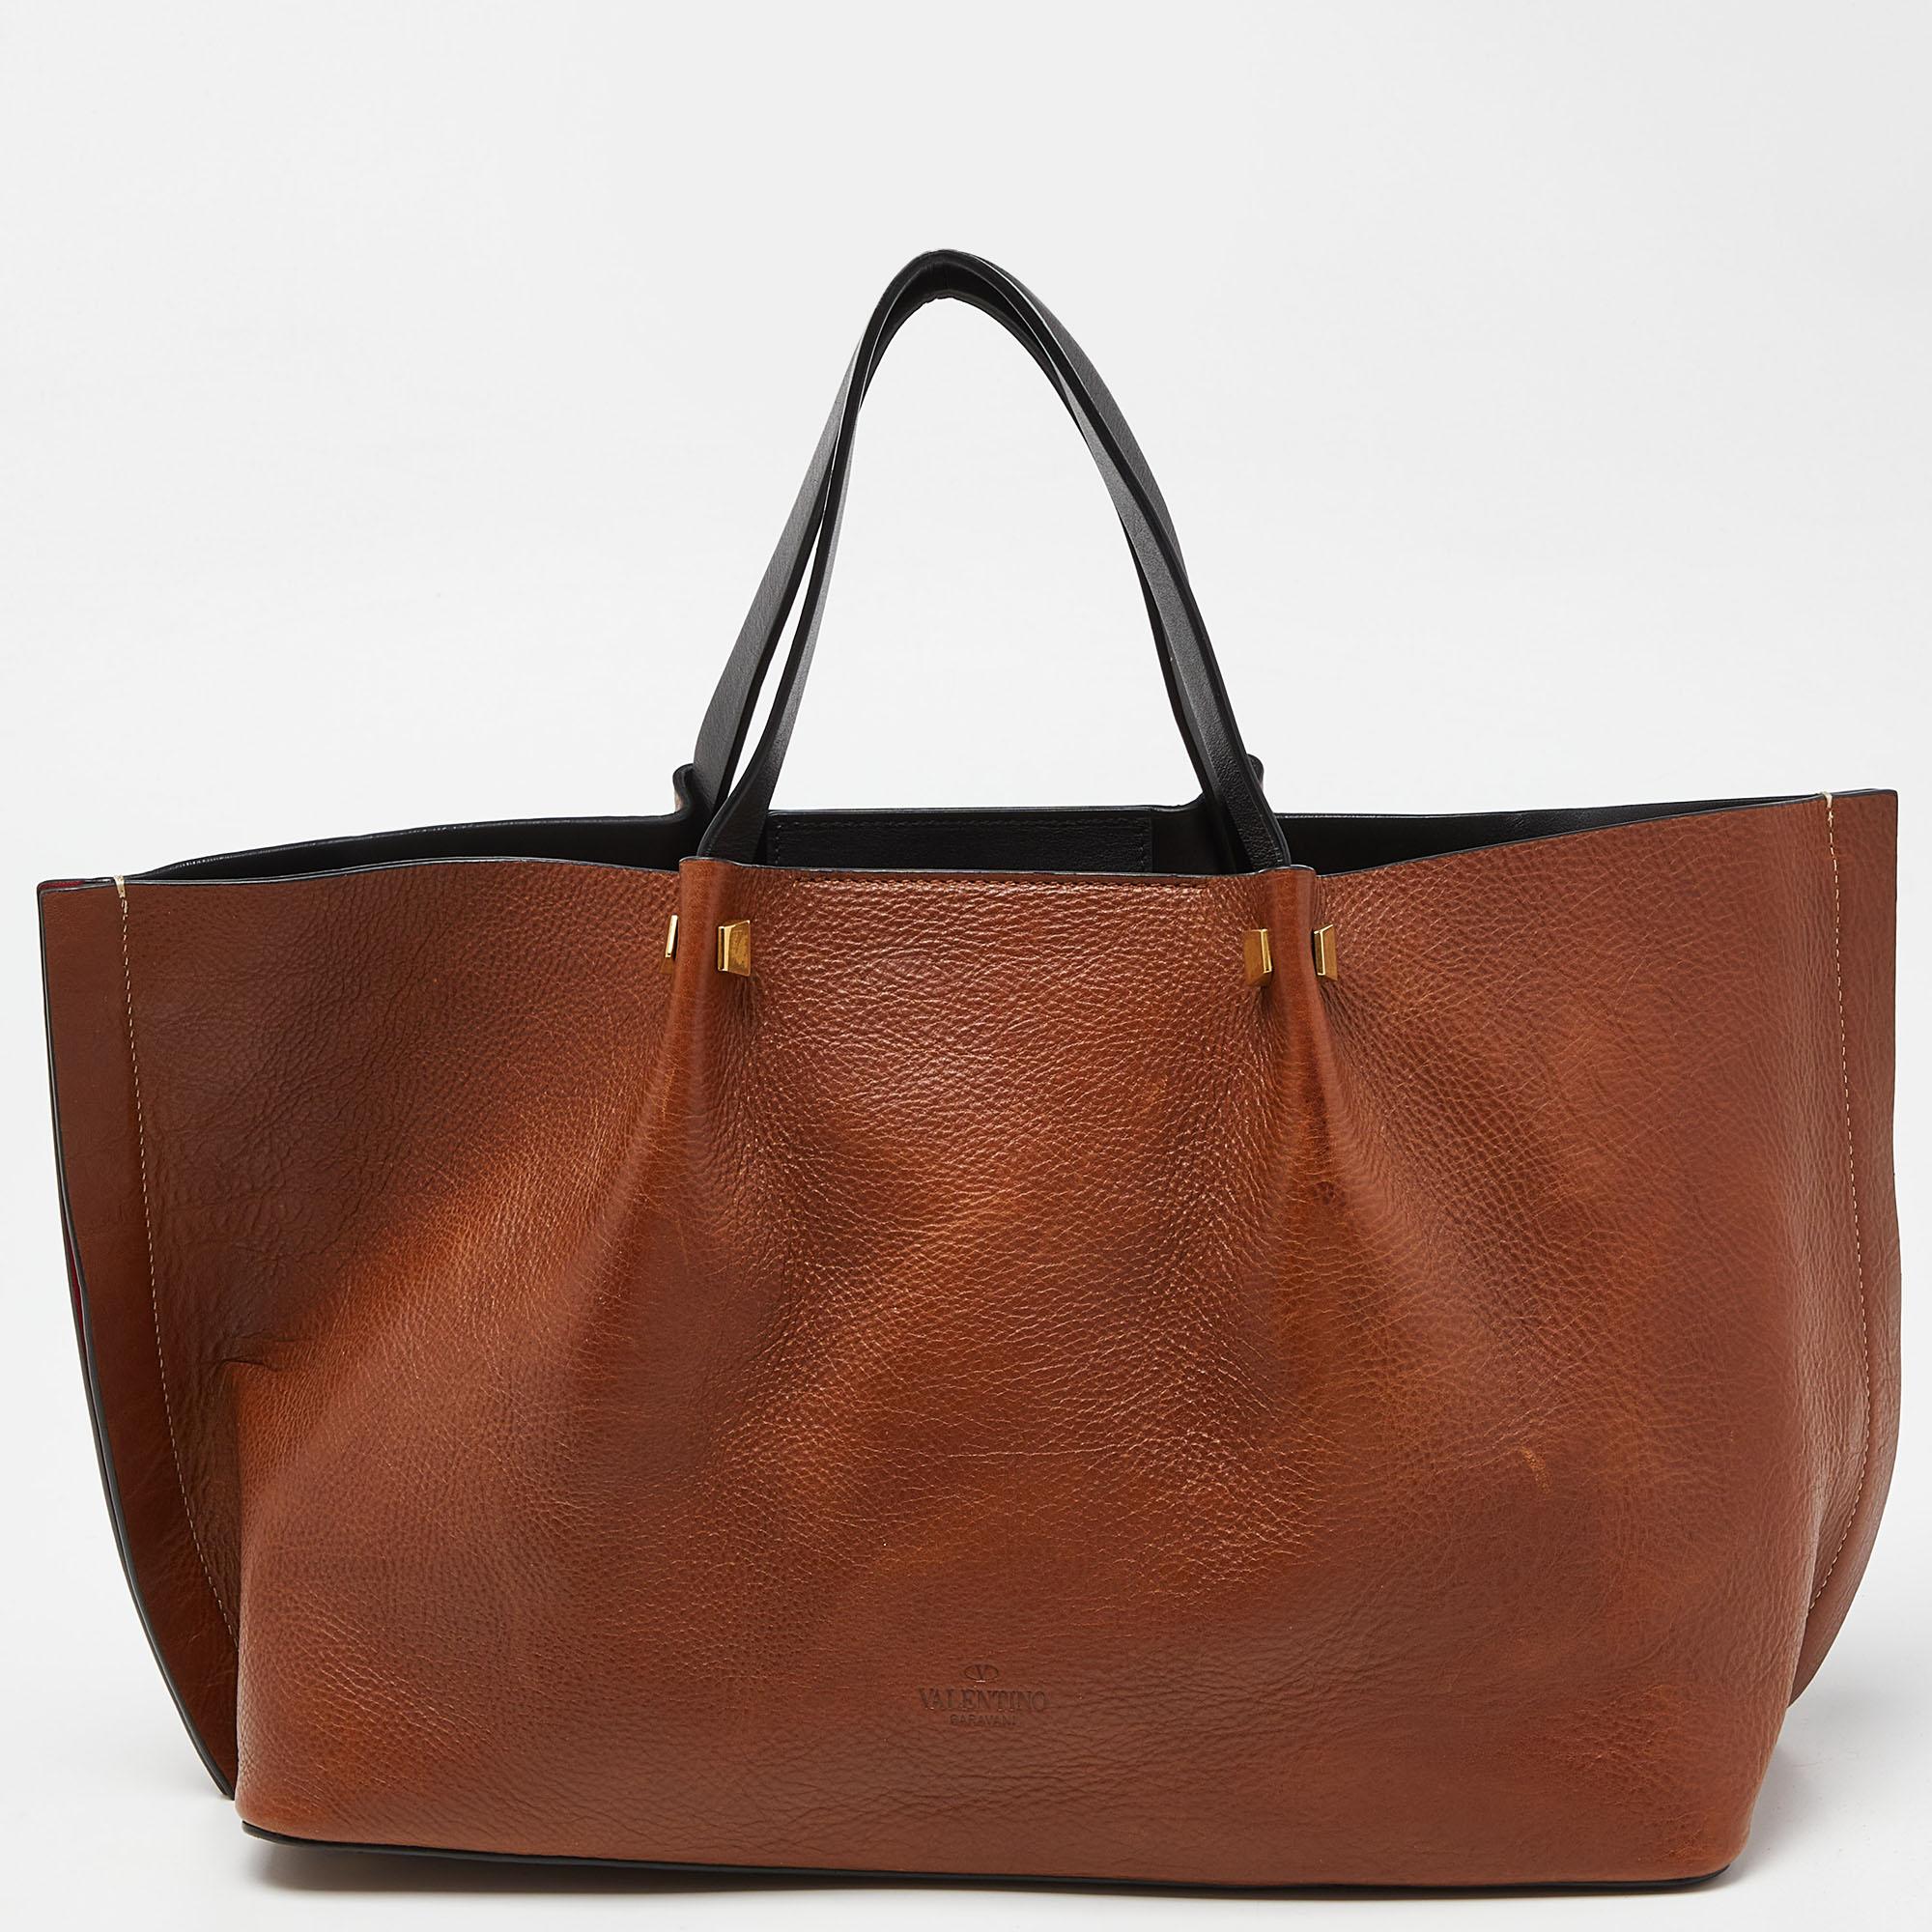 This Escape tote from Valentino represents a dialogue between innovation and tradition and will be your everyday companion. Made from fine leather, it features two top handles, an optional shoulder strap, and a spacious interior to store your